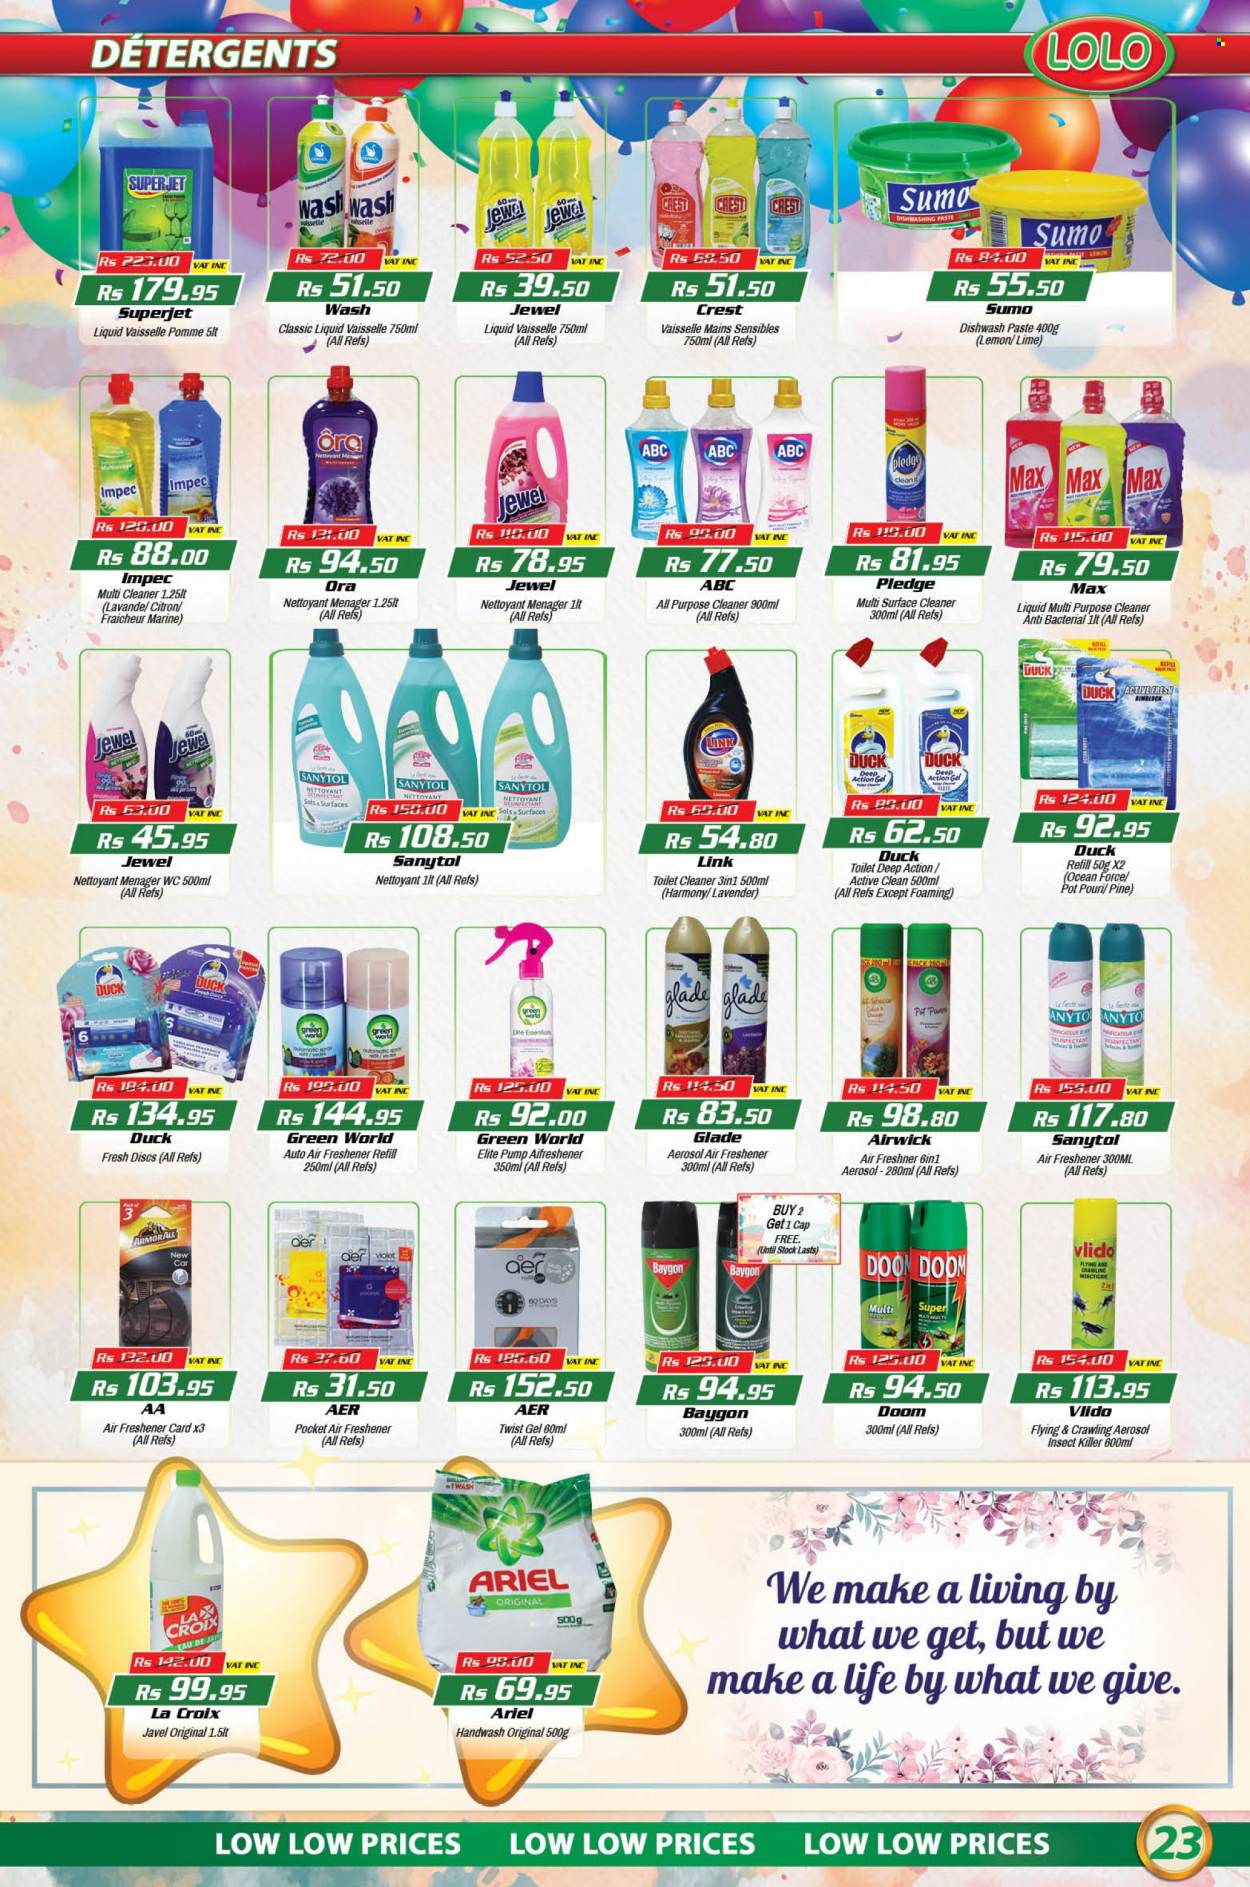 thumbnail - LOLO Hyper Catalogue - 26.07.2022 - 16.08.2022 - Sales products - surface cleaner, cleaner, all purpose cleaner, toilet cleaner, Pledge, Ariel, dishwashing liquid, hand wash, Crest, insecticide, insect killer, pot, pan, air freshener, Air Wick, Glade, Lee, cap, pump, Sanytol. Page 23.